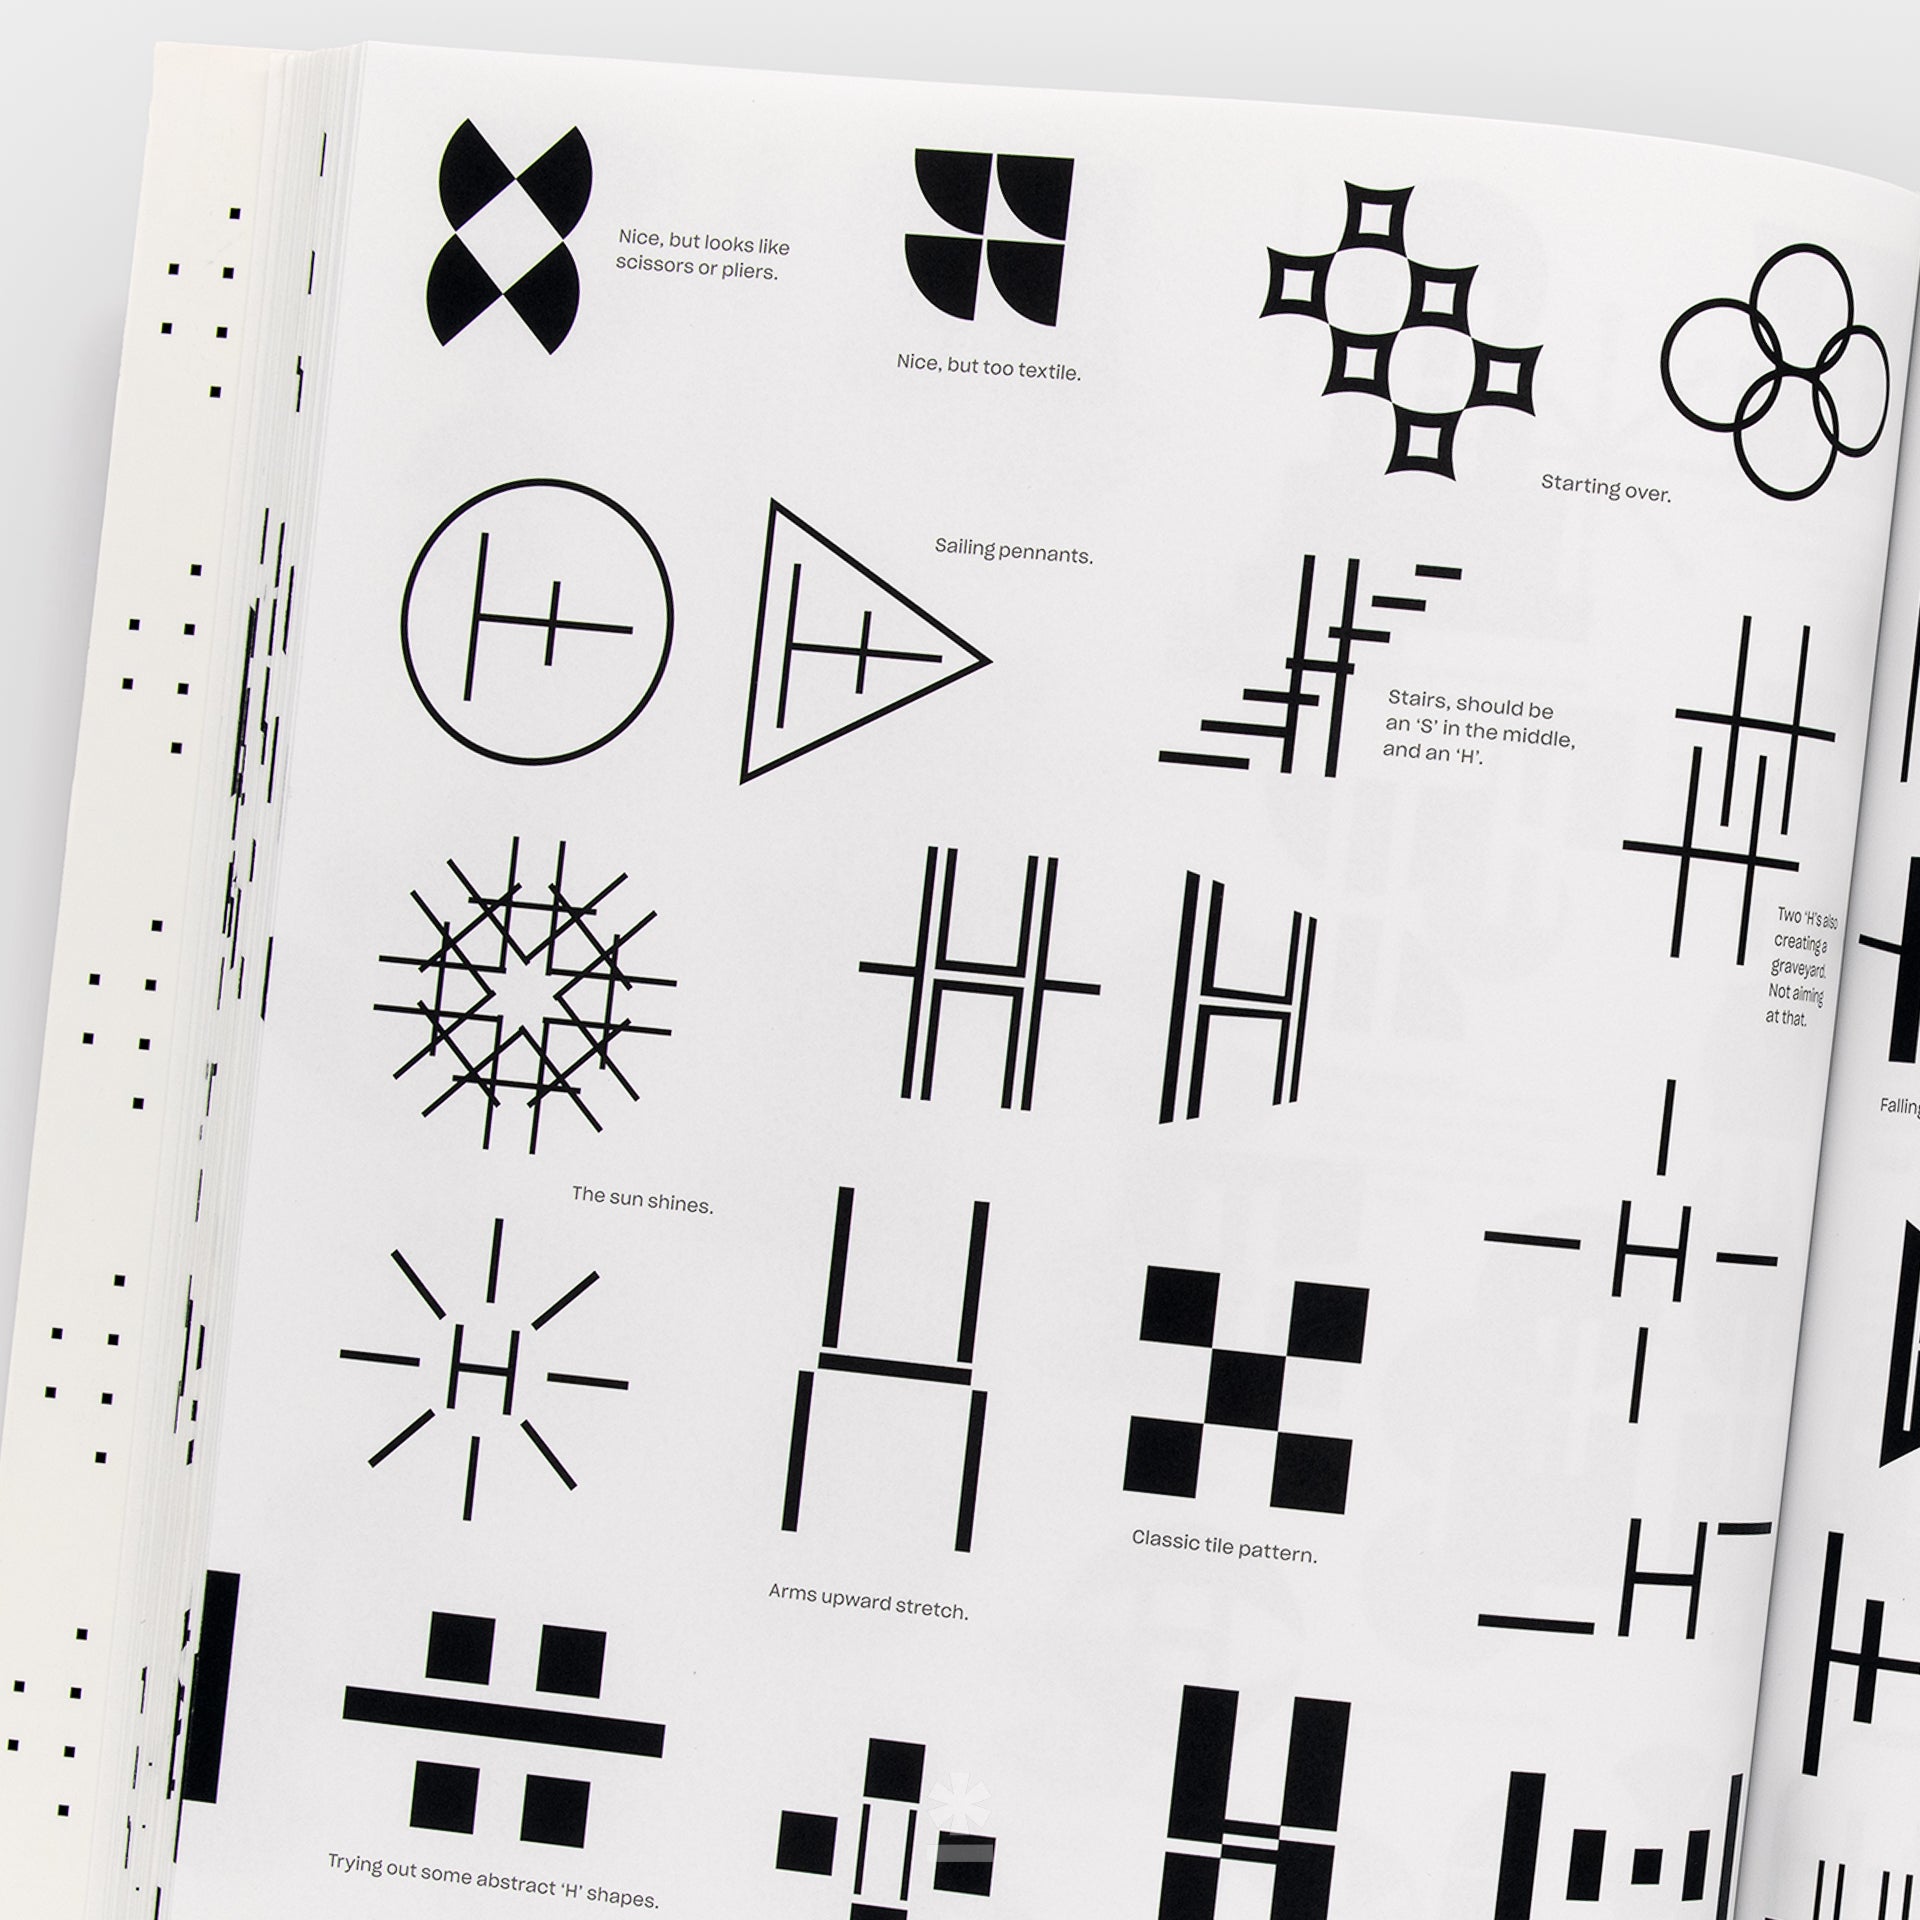 Process - Visual Journeys In Graphic Design